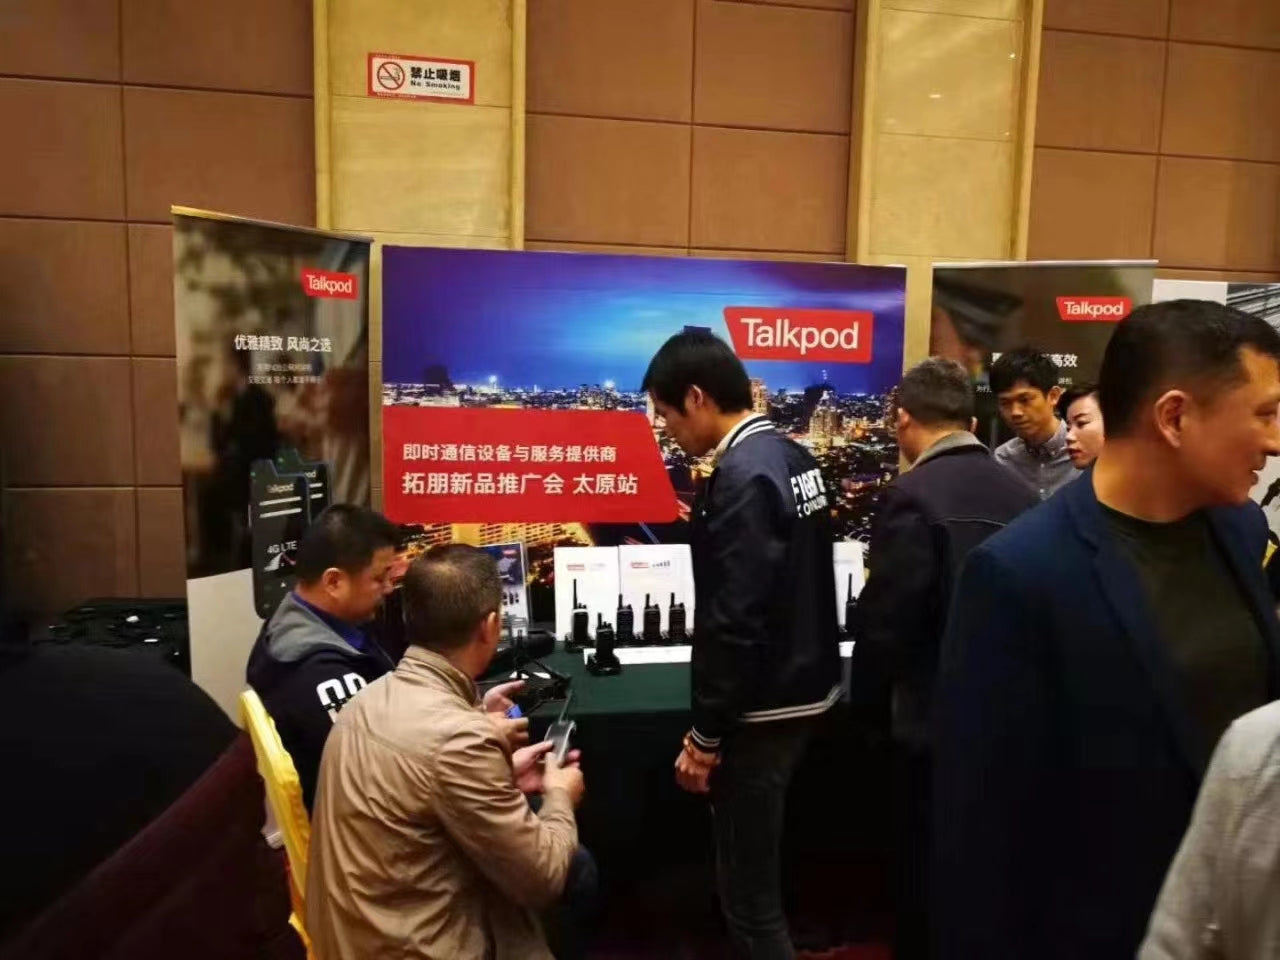 Talkpod Shines at Product Showcase Event in Taiyuan!